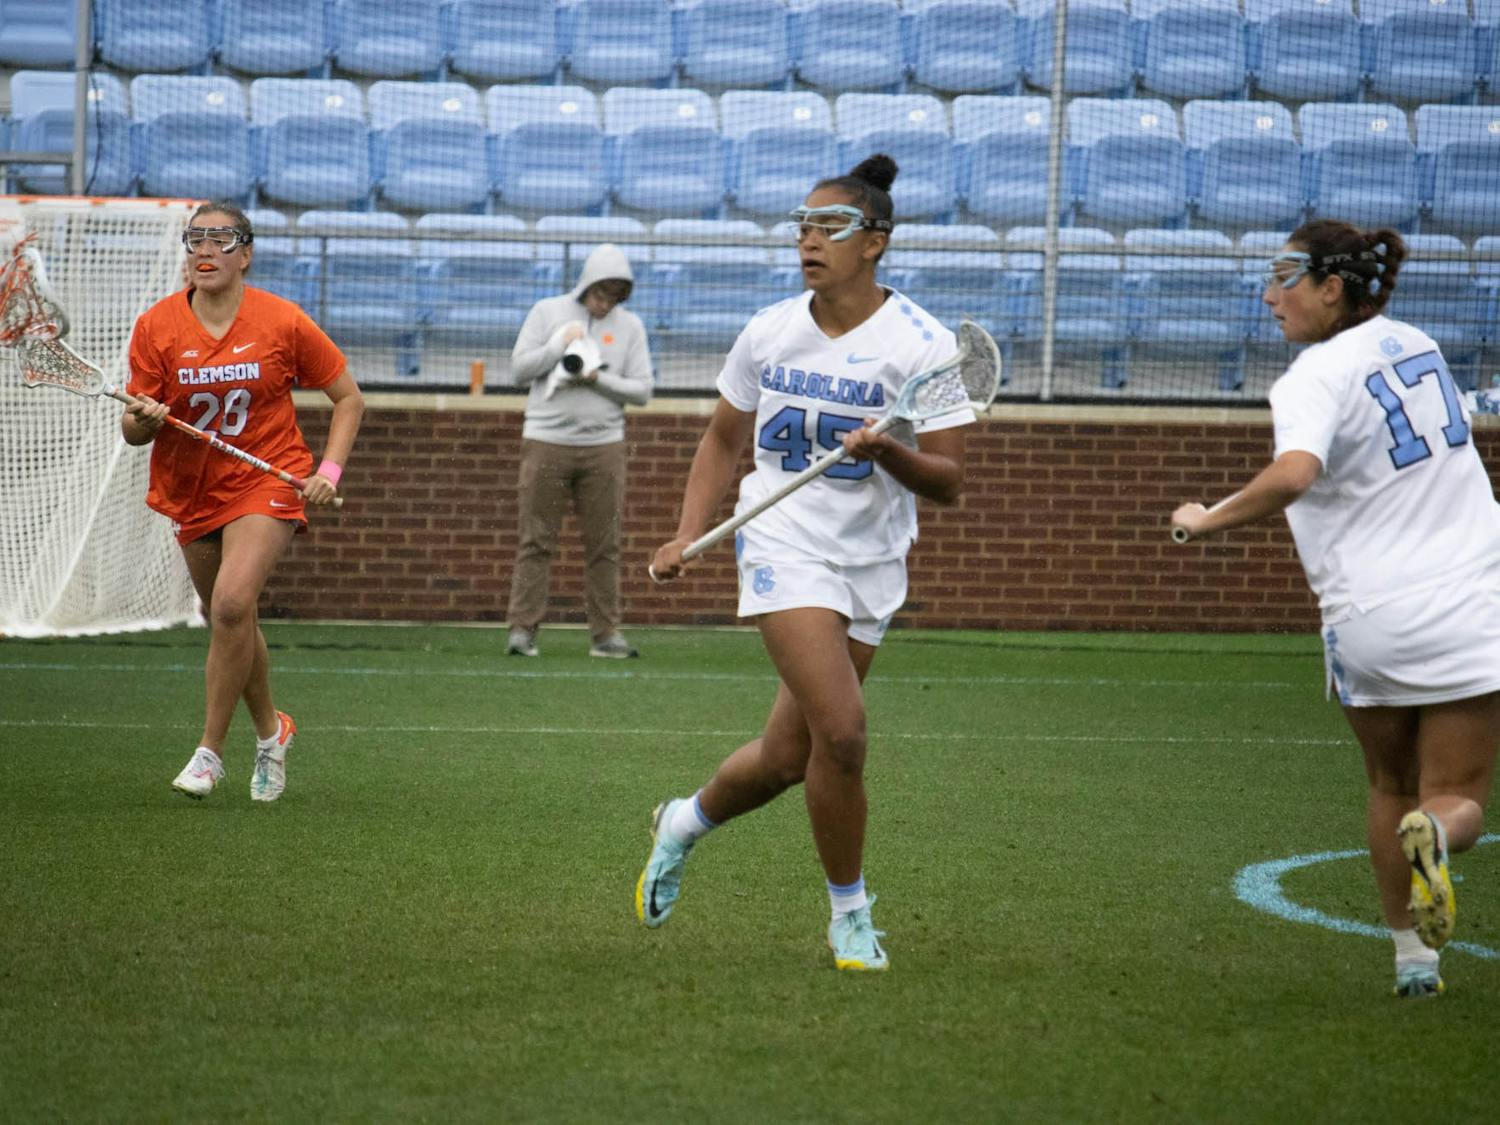 UNC sophomore defender Brooklyn Walker-Welch (45) runs across the field during the women’s lacrosse game against Clemson at Dorrance Field on Sunday, March 26, 2023.